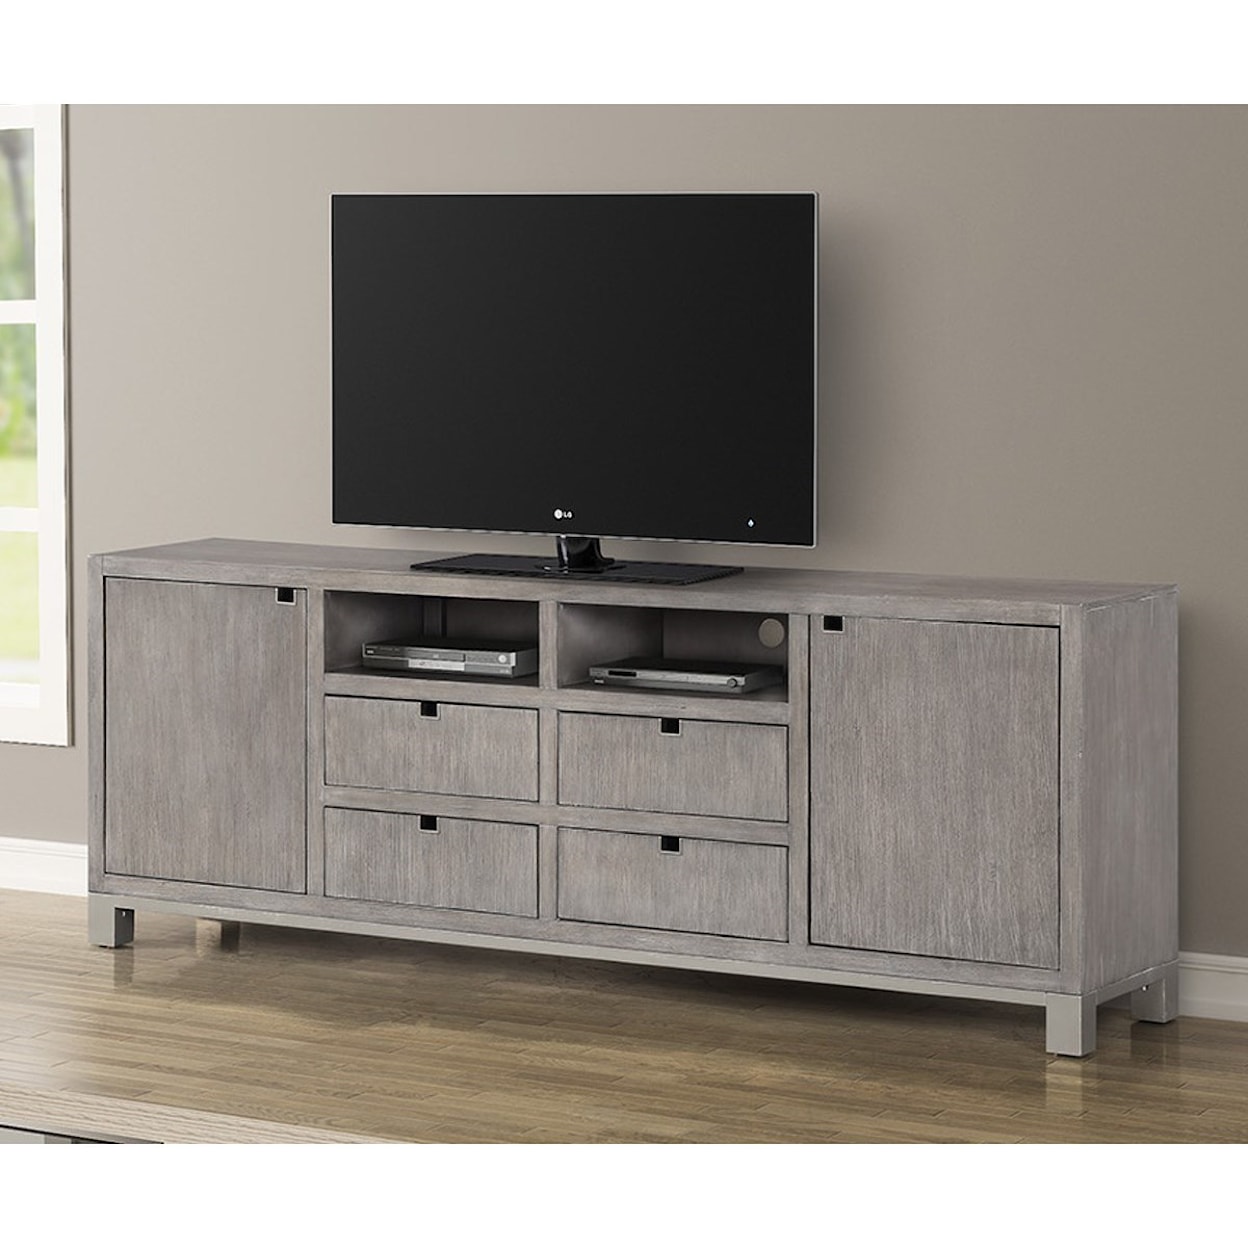 Legends Furniture Pacific Heights 84" TV Console